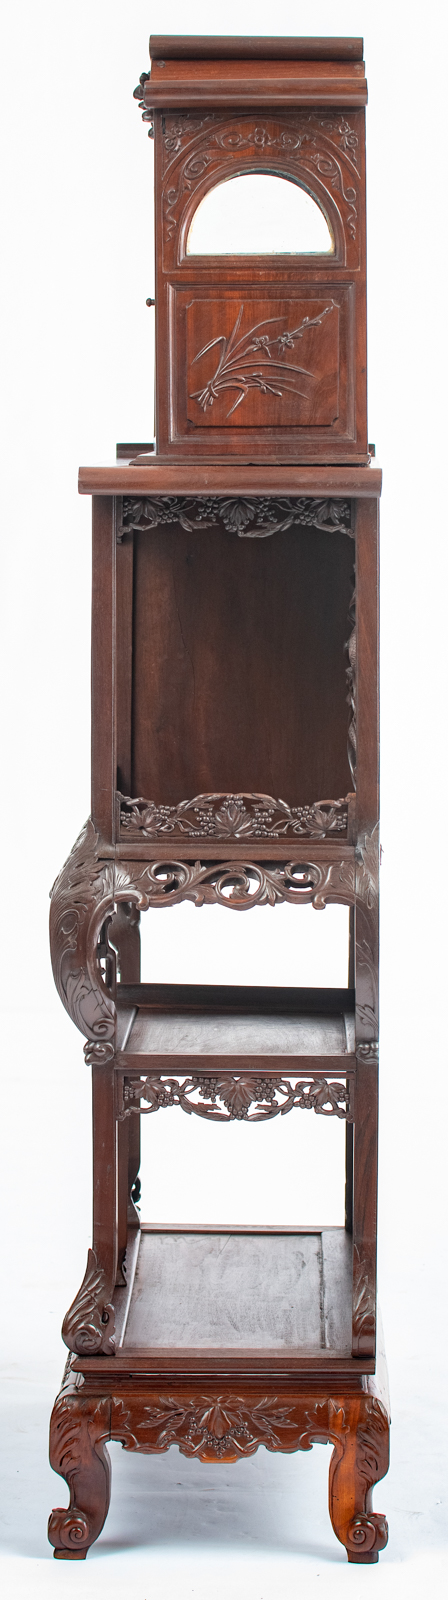 A Chinese inspired exotic hardwood display cabinet, richly sculpted with flowers, bats and dragons, - Image 3 of 5